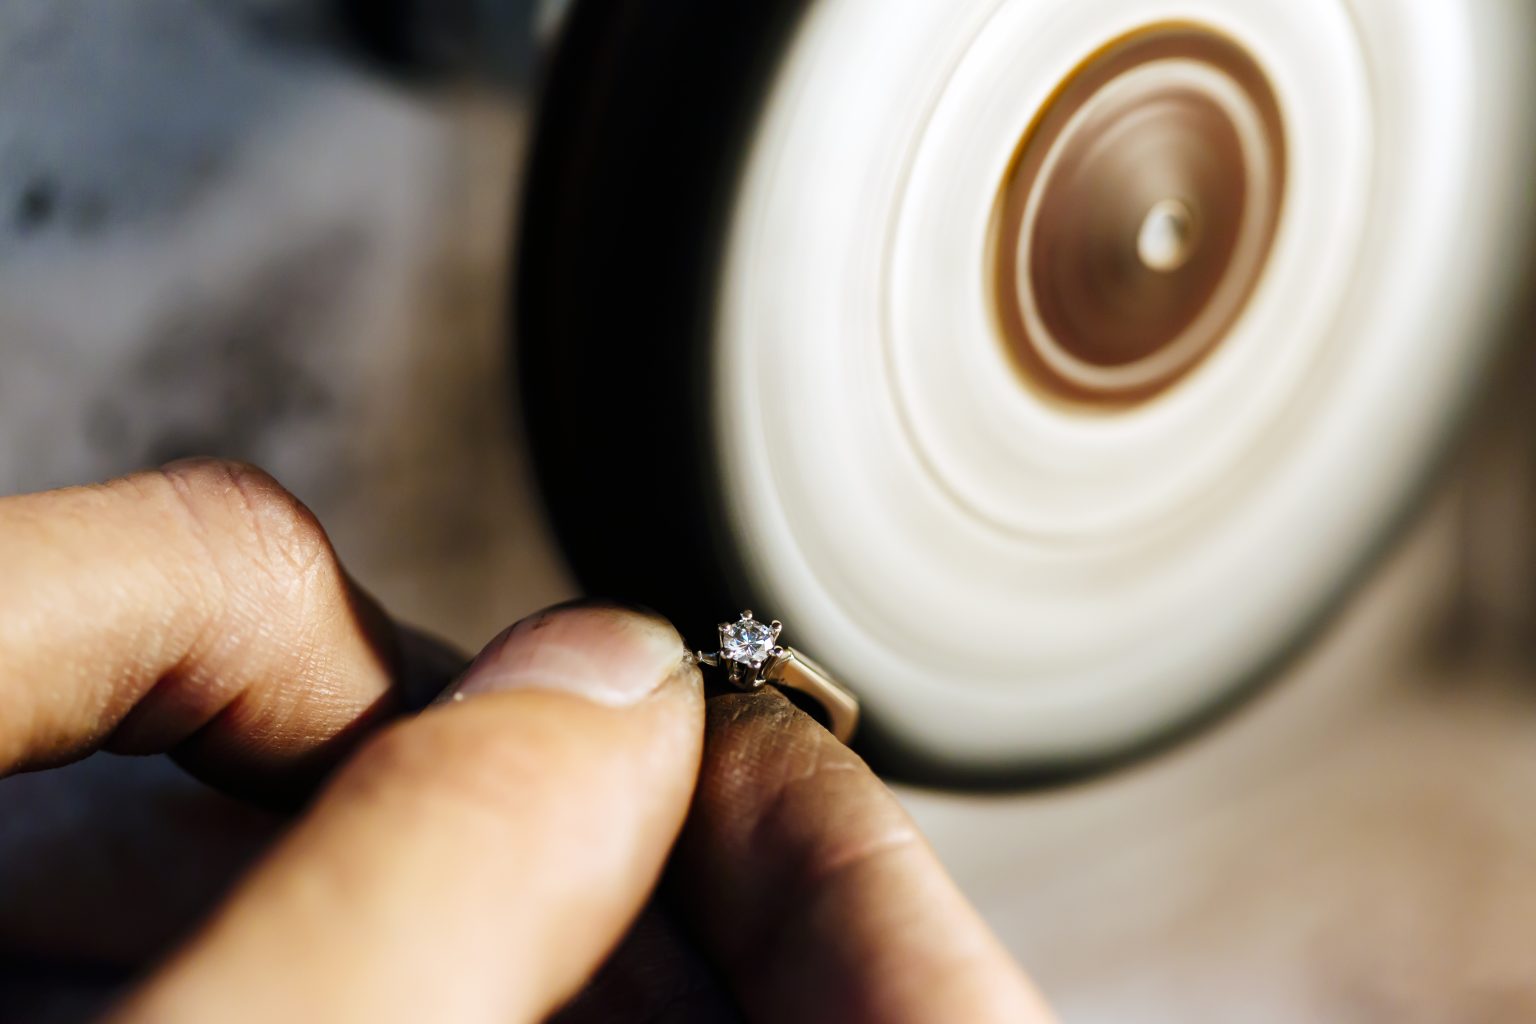 Jewelry Repair Tips: What To Do About Broken Jewelry